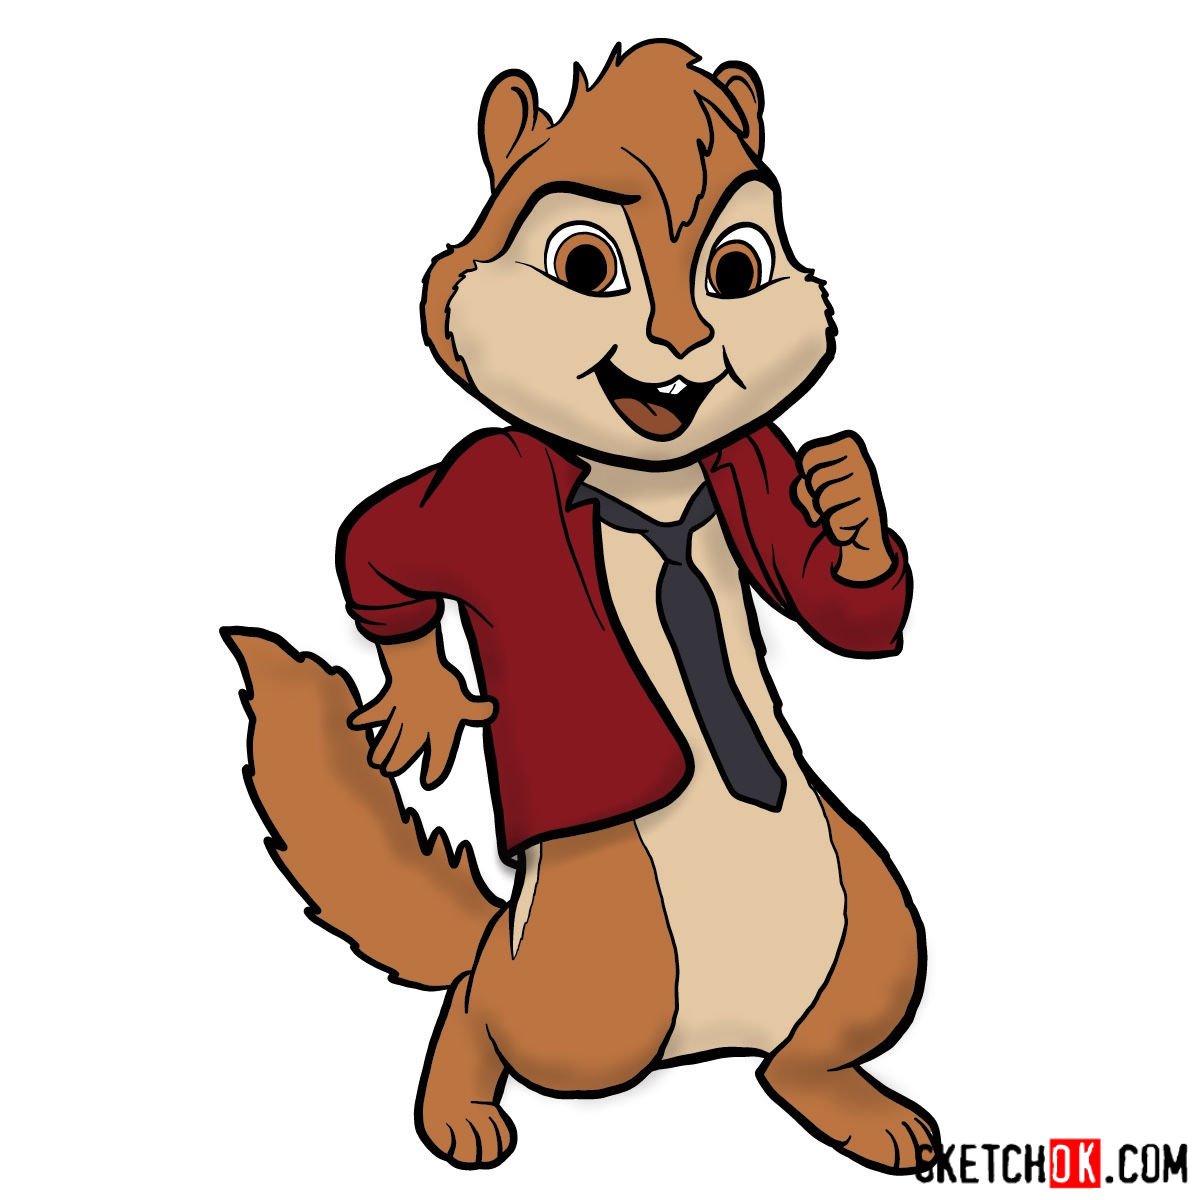 How to draw Alvin from Alvin and the Chipmunks